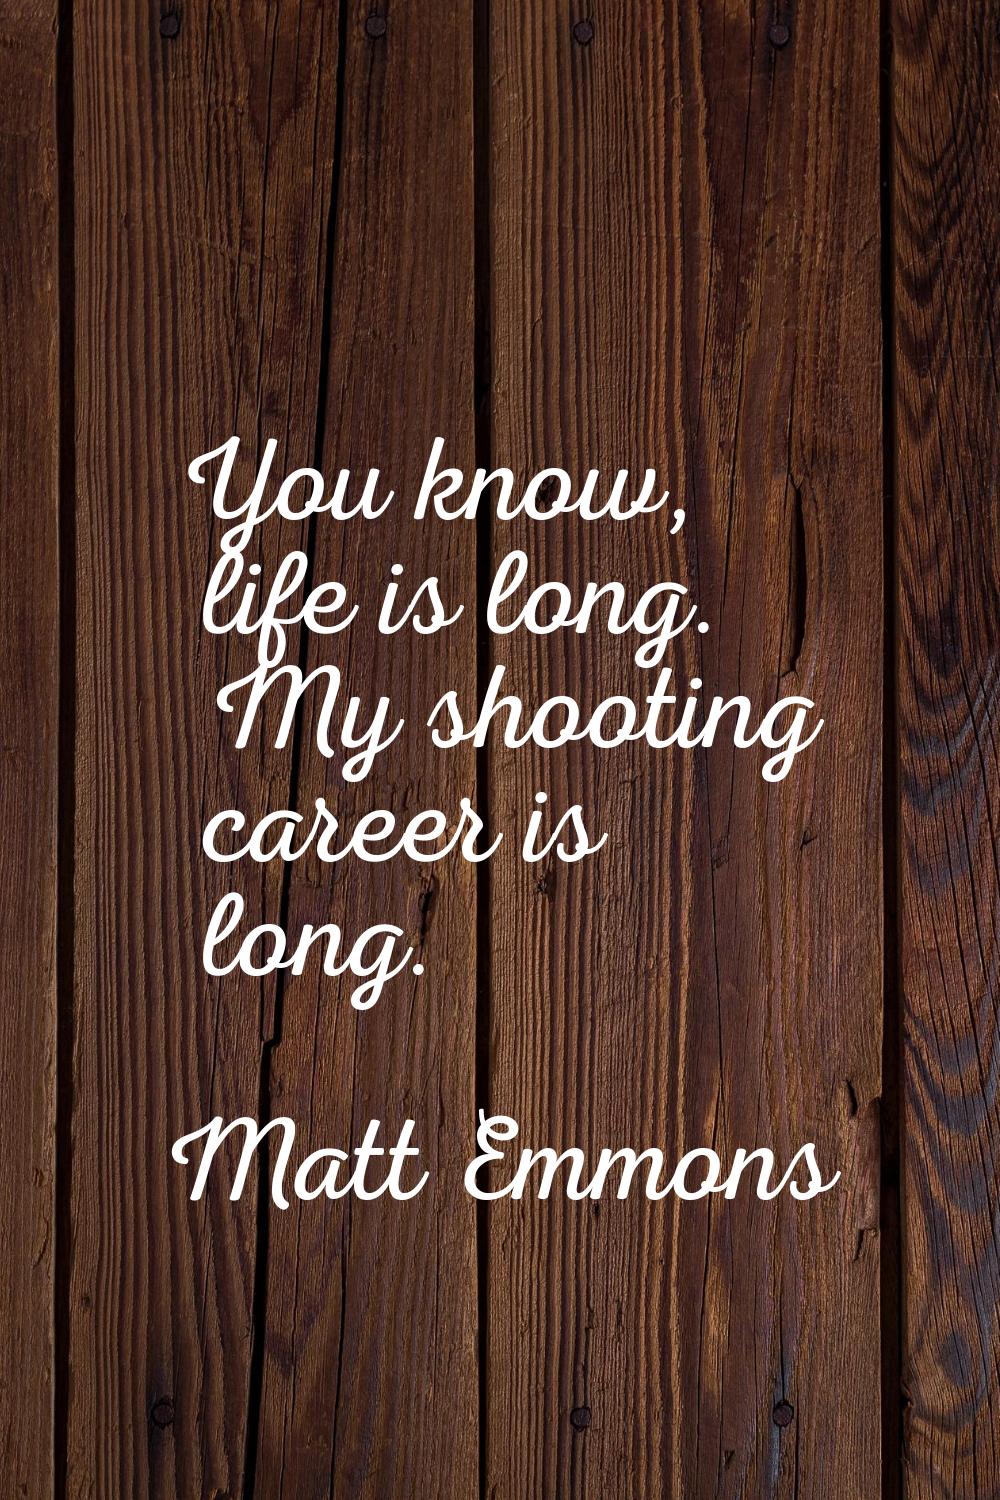 You know, life is long. My shooting career is long.